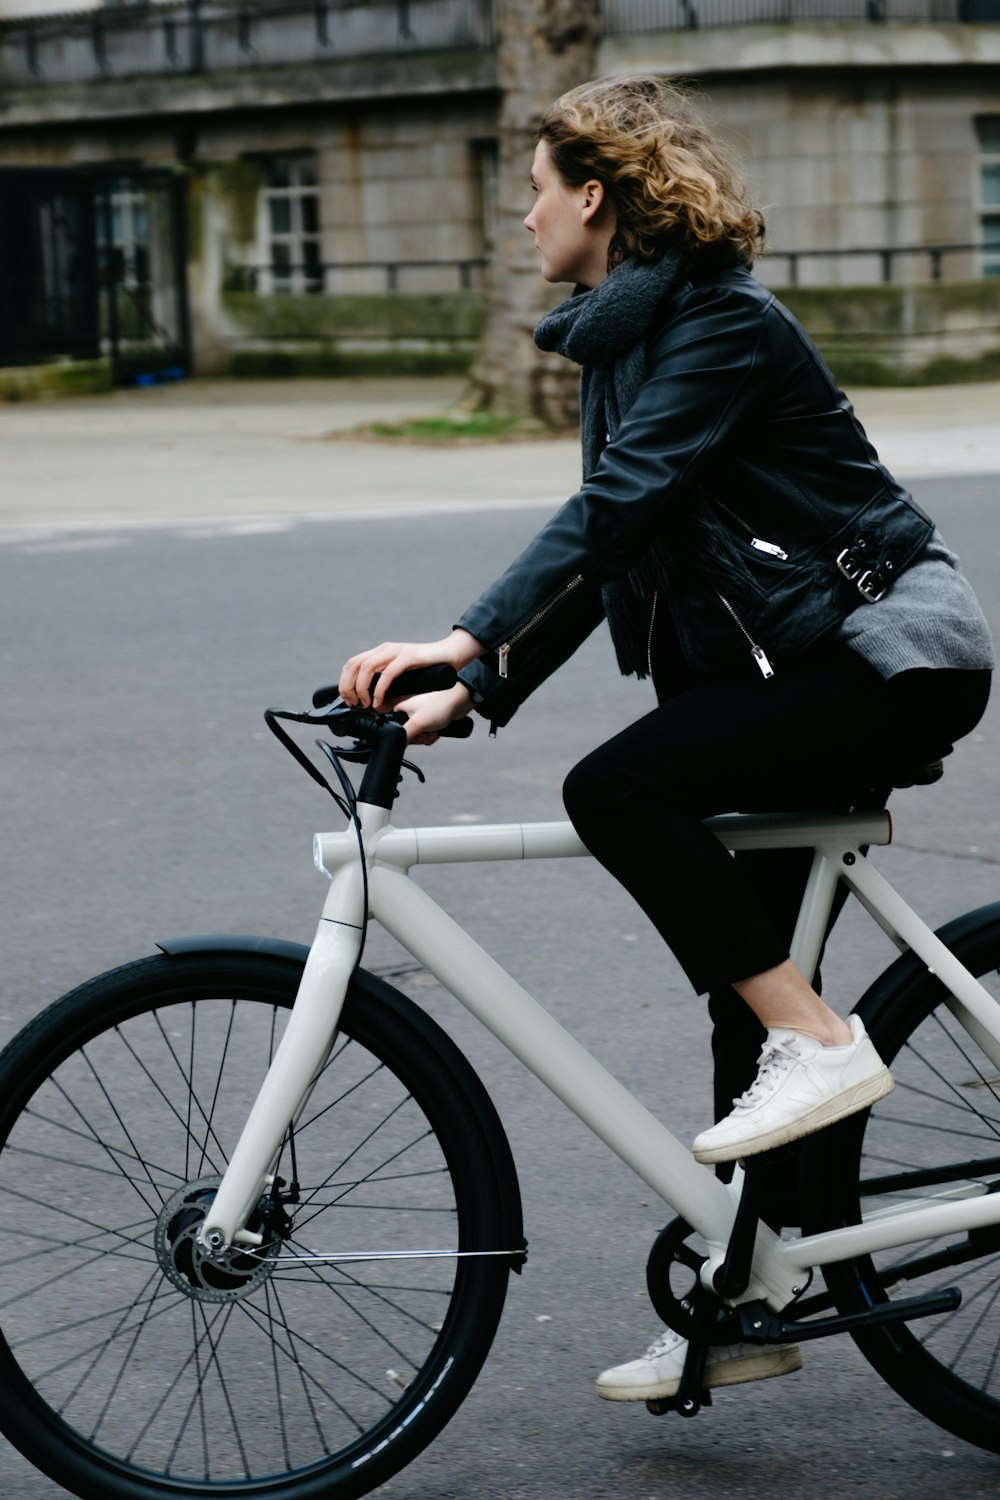 person in black jacket riding on white bicycle during daytime